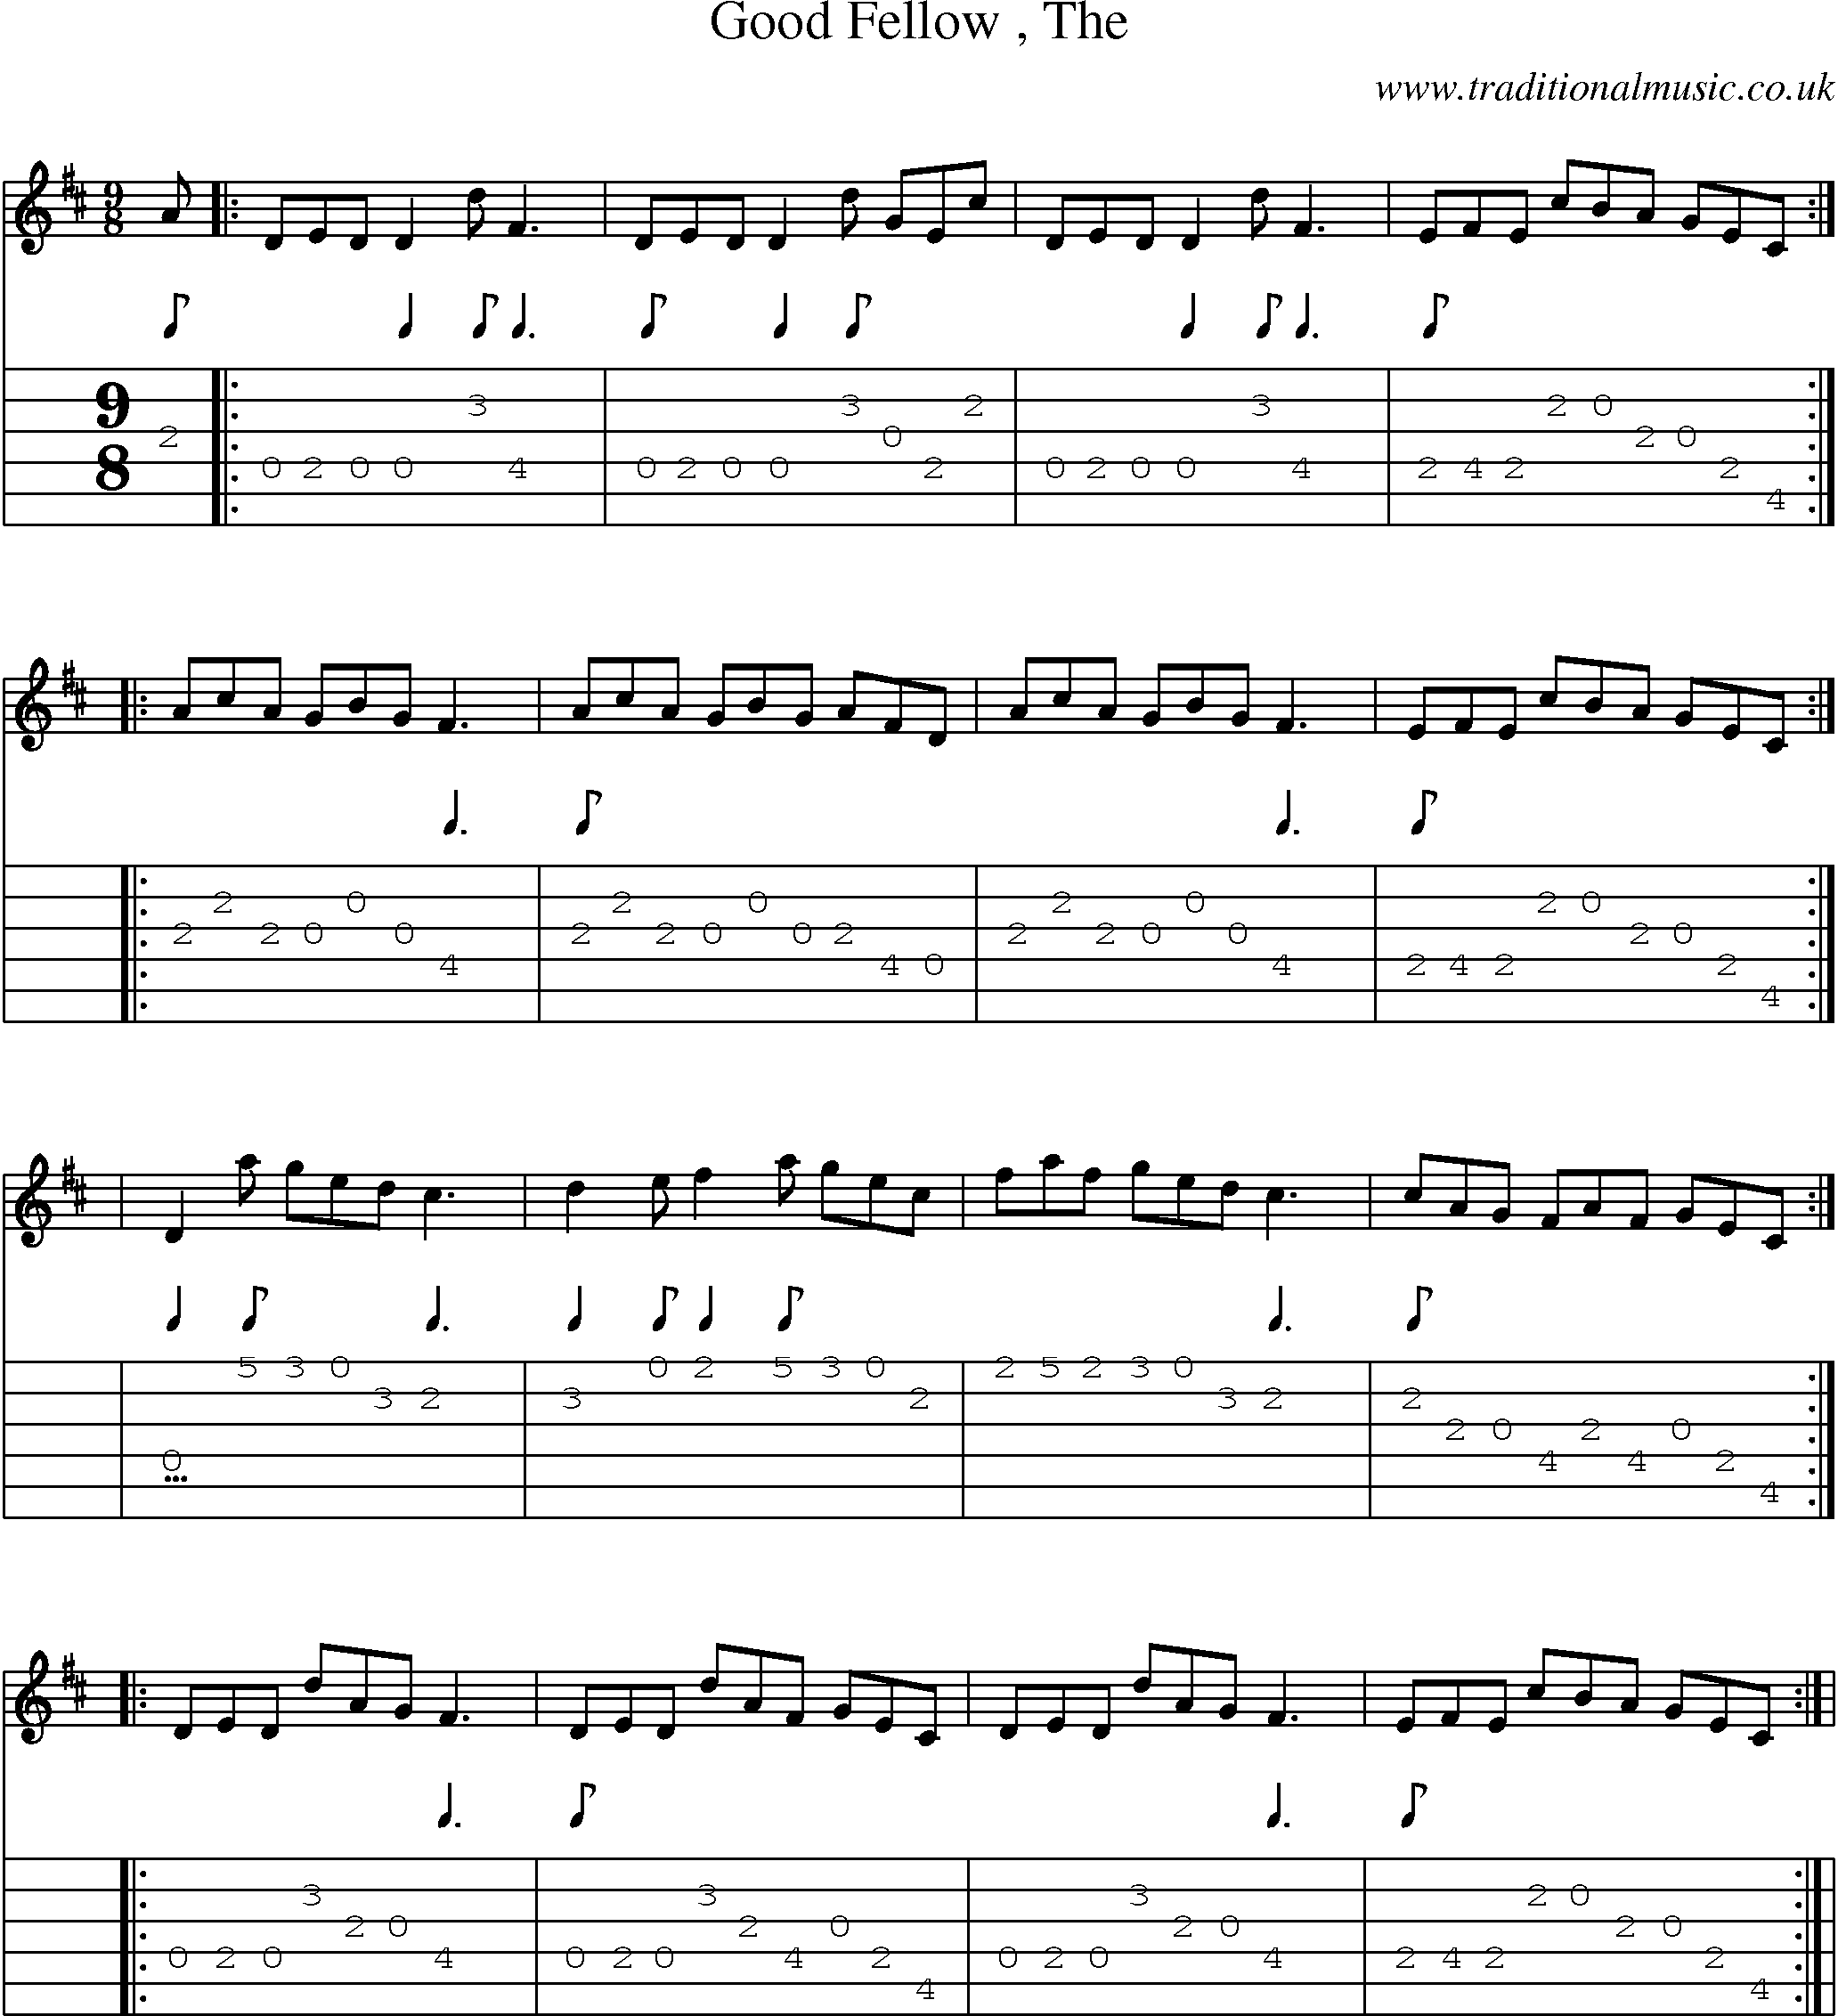 Music Score and Guitar Tabs for Good Fellow